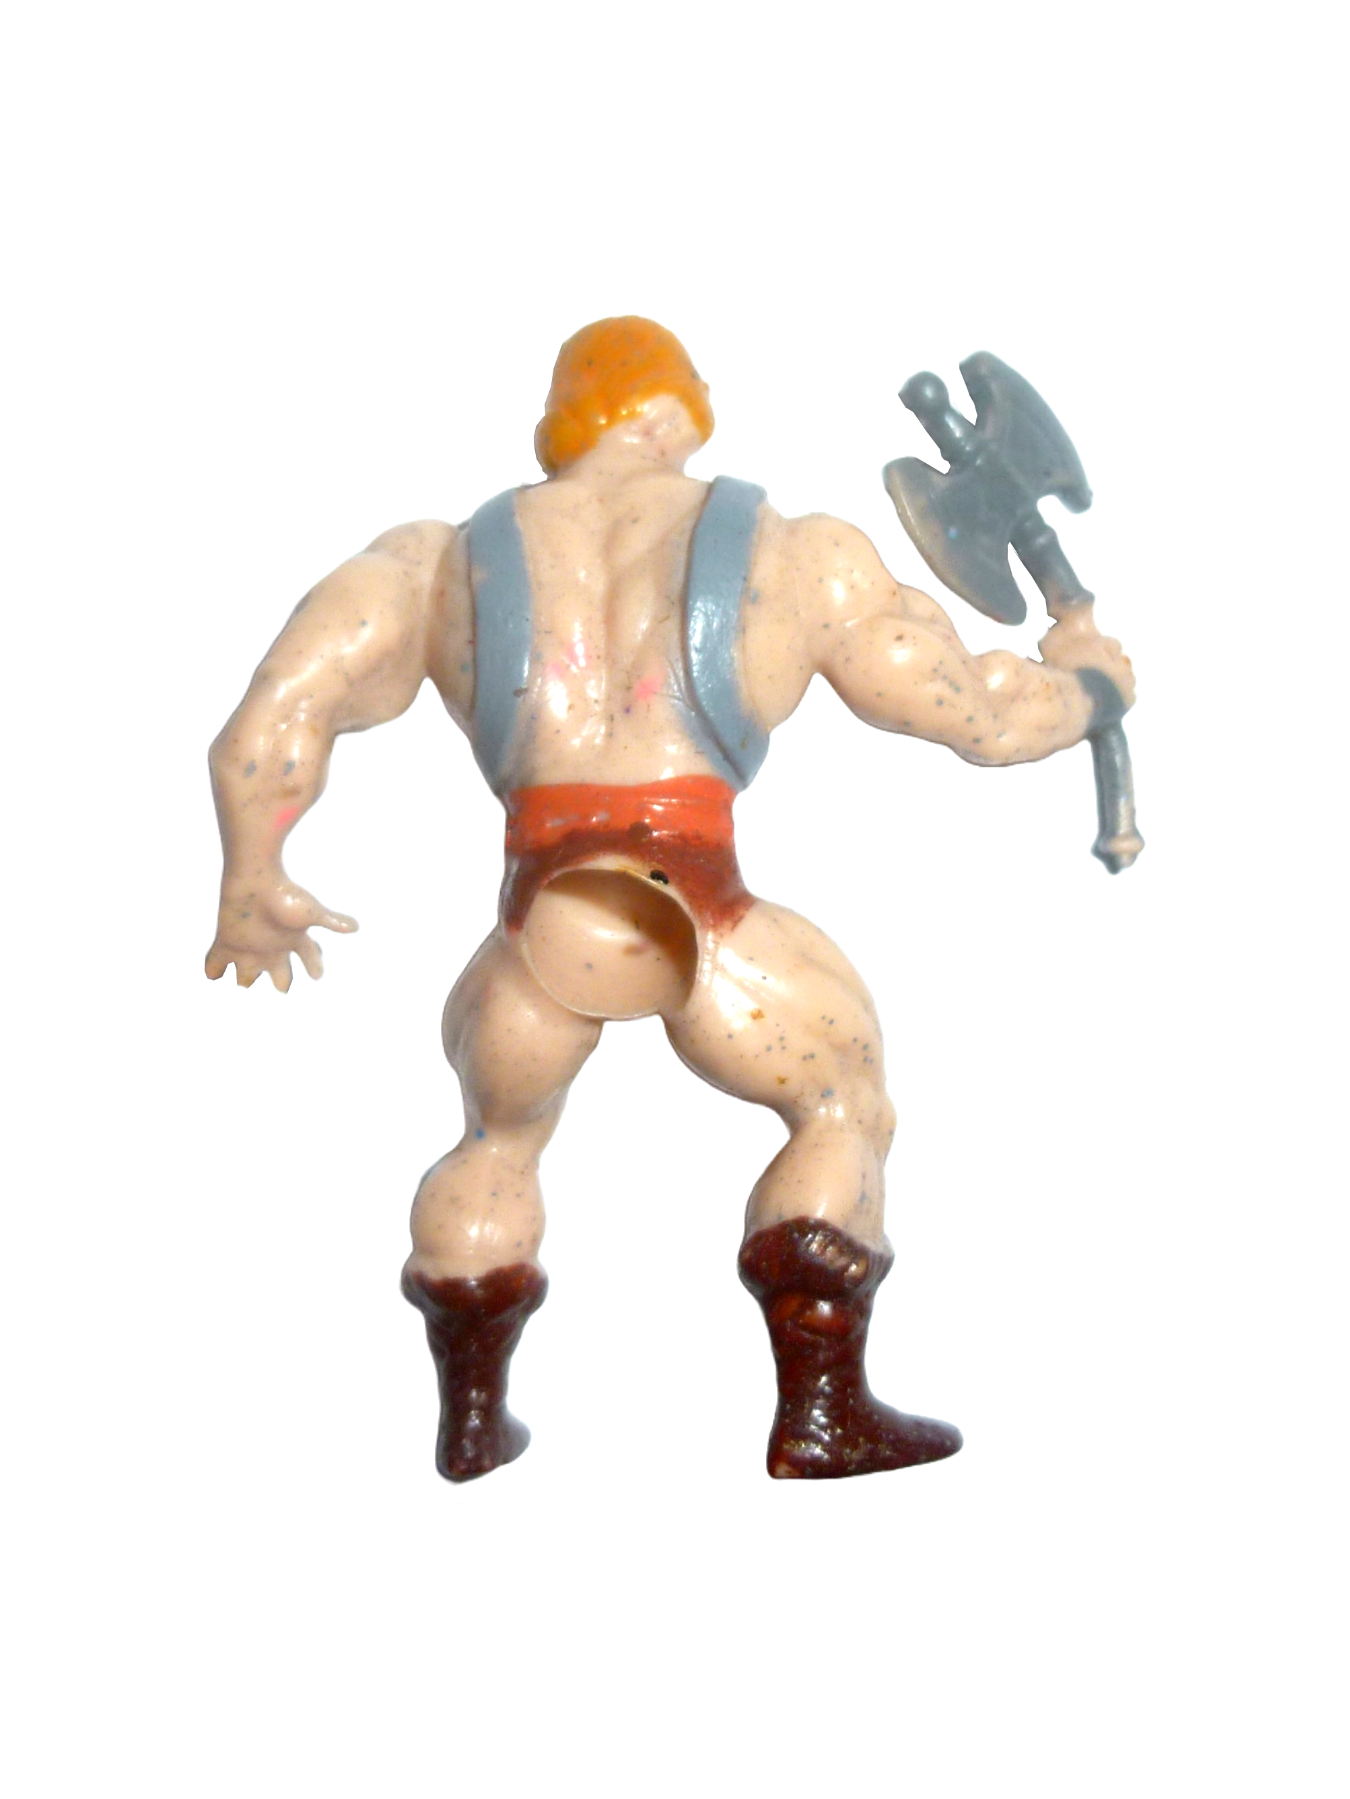 He-Man - small cake figure with axe 2